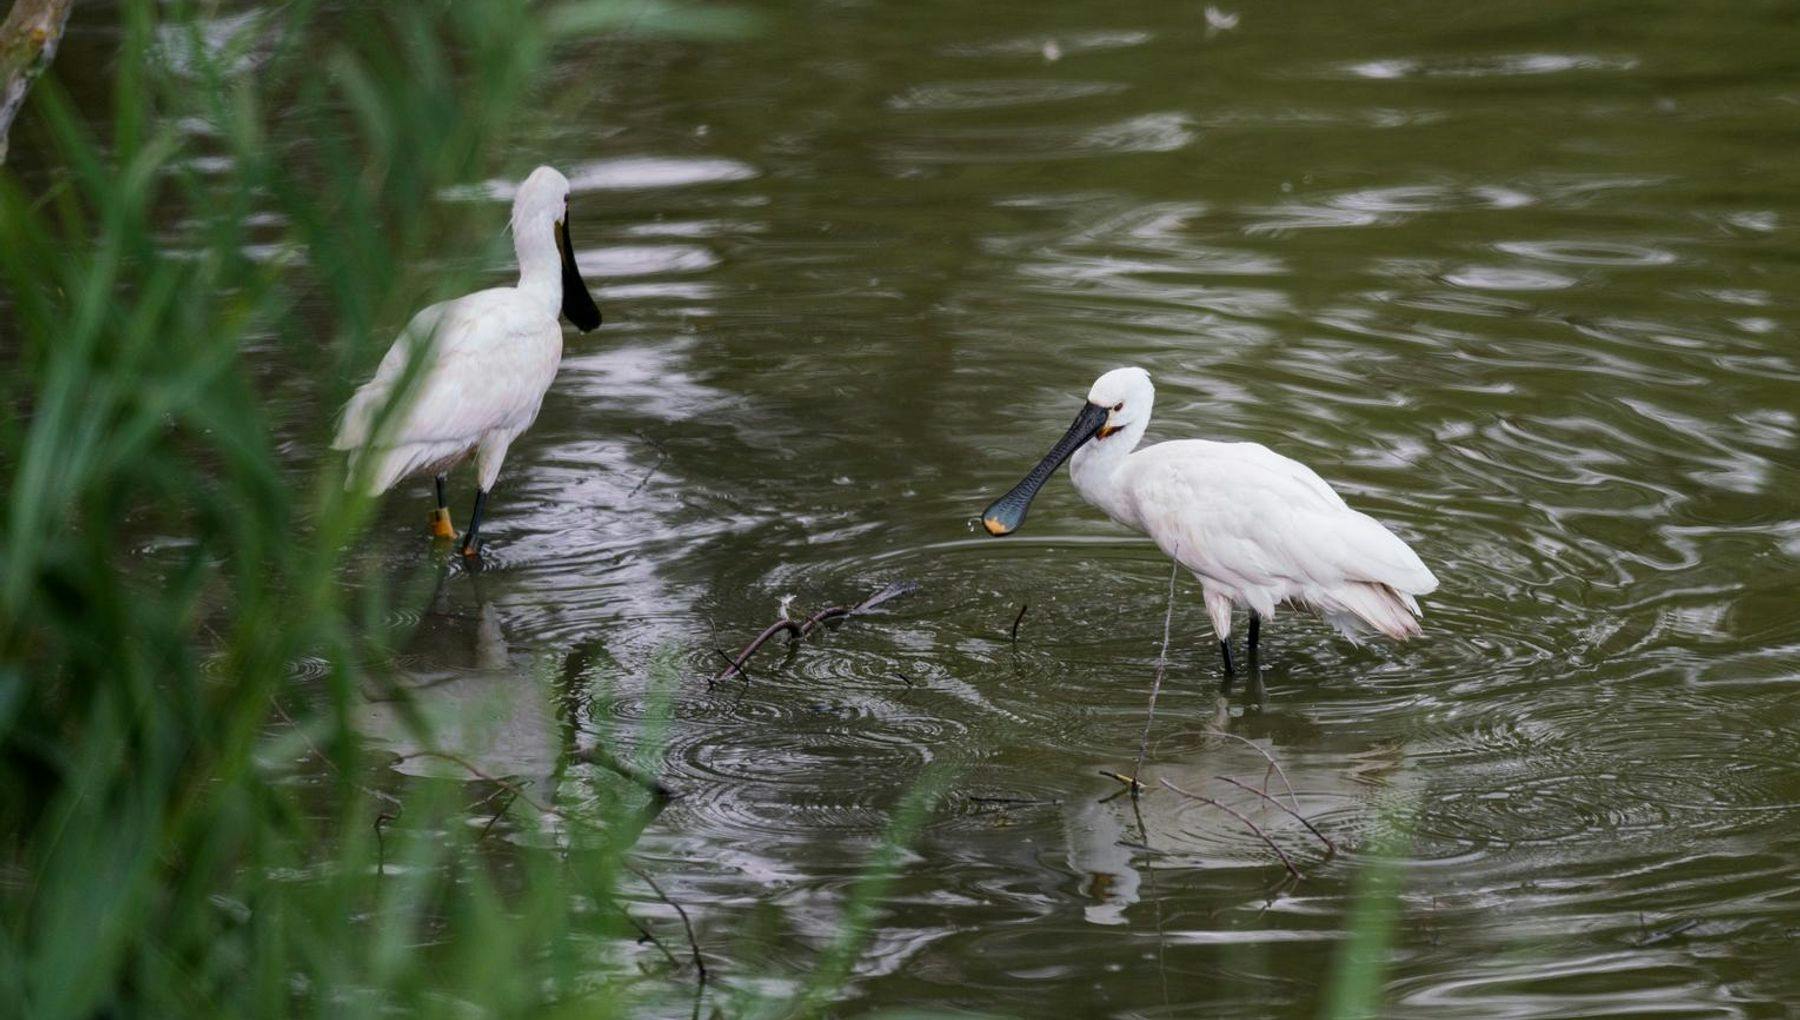 A couple of spoonbills standing in the water.